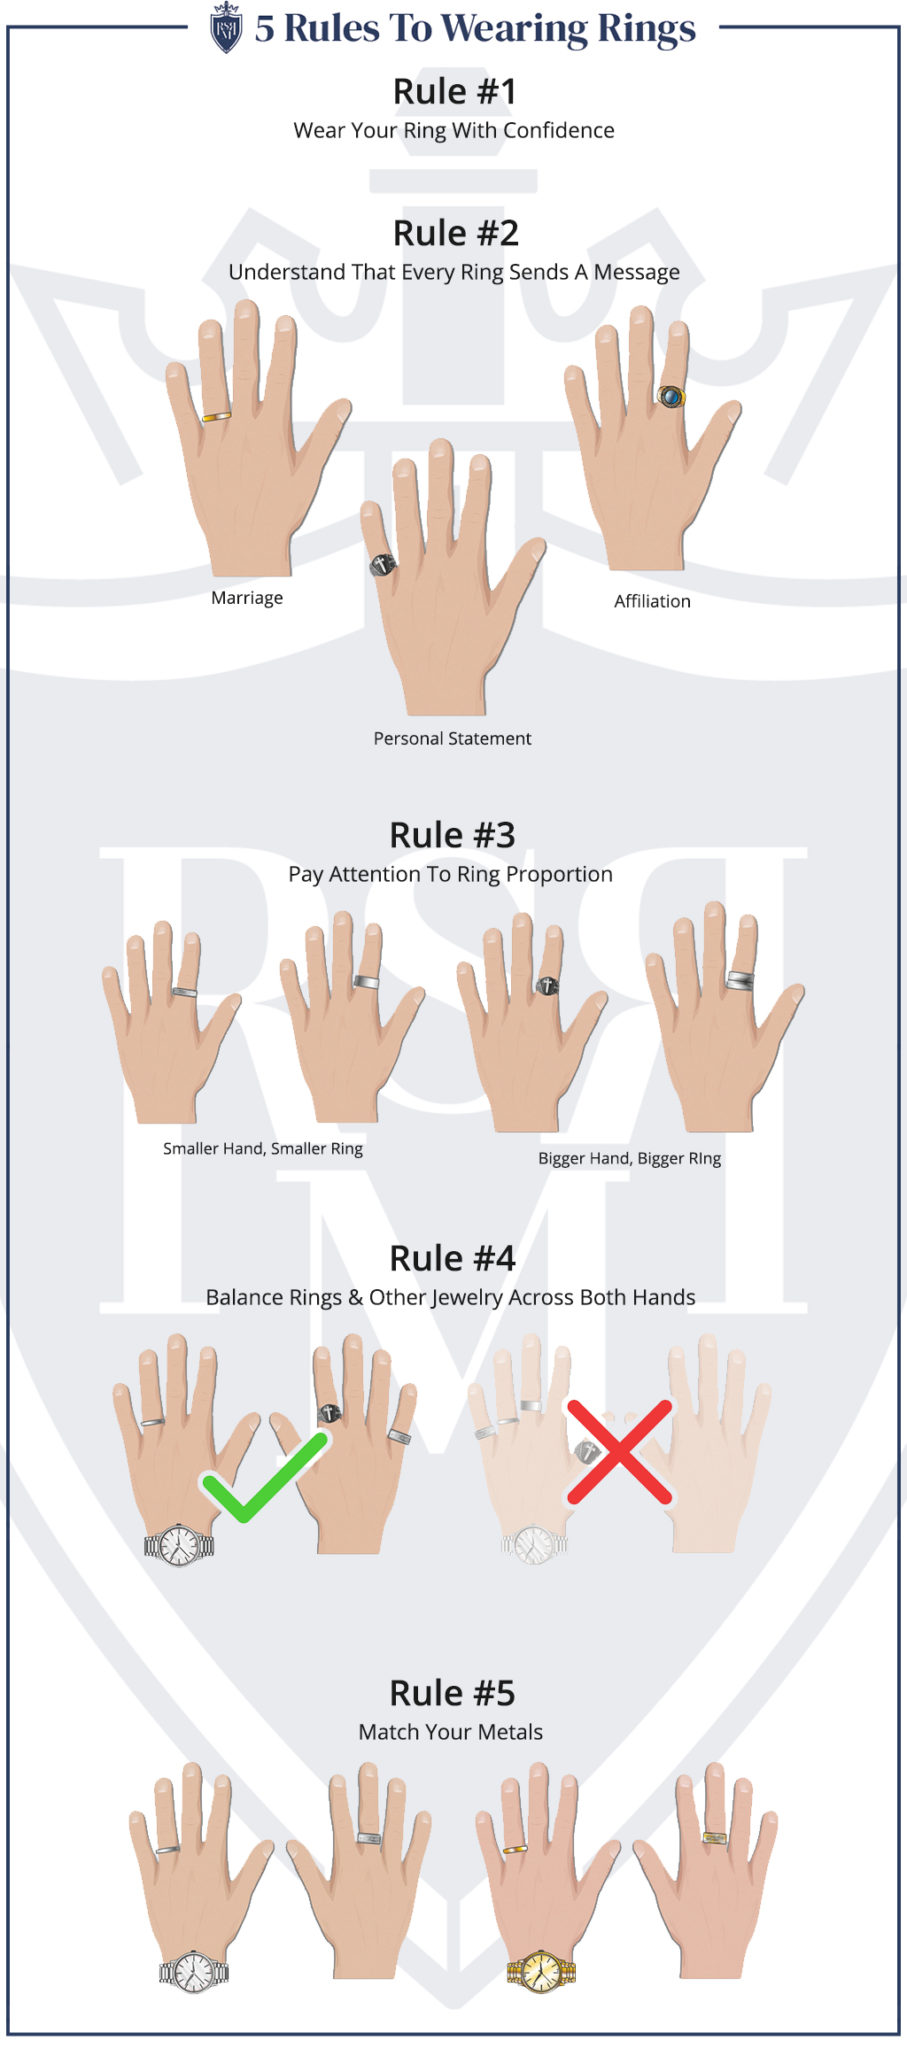 Which Finger Should You Wear a Ring On? – HealthyVox